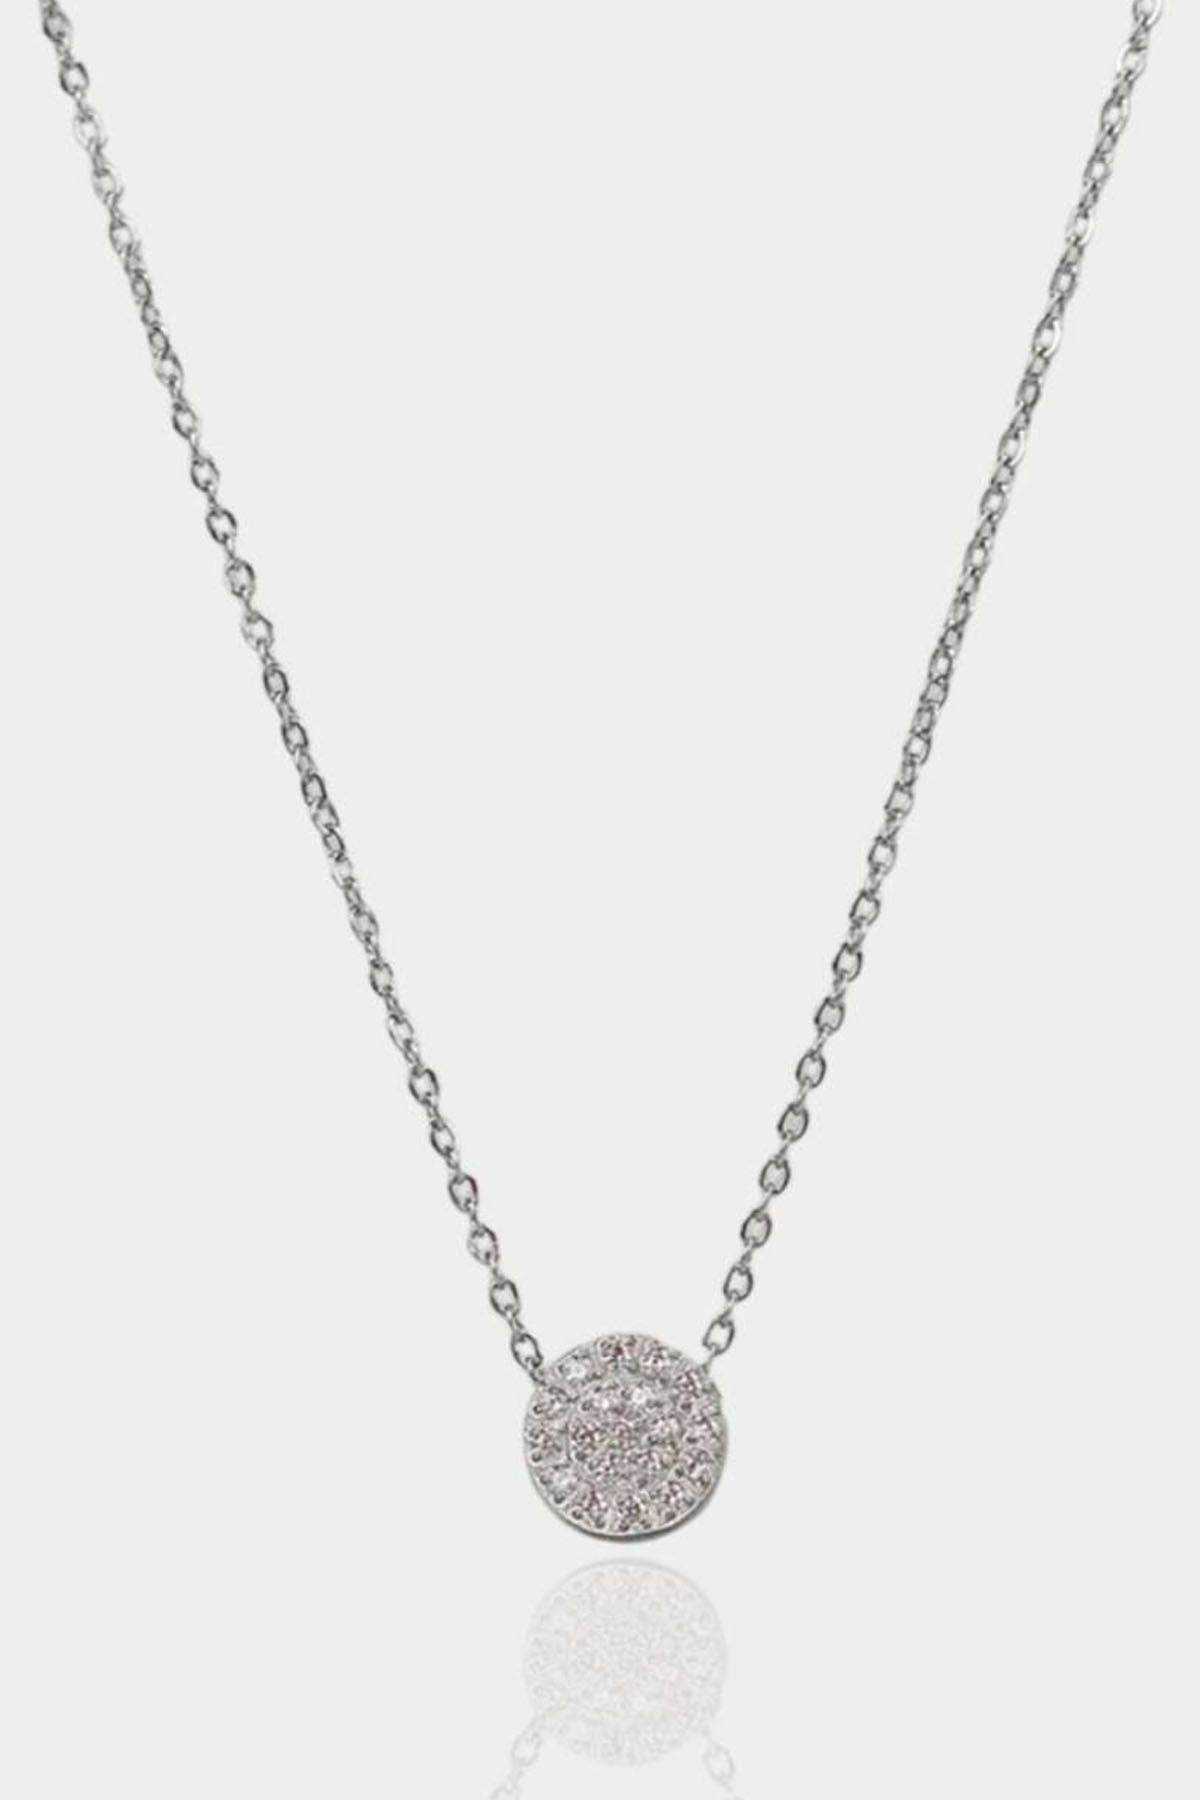 Classical Round Zirconia Necklace - 925 Silver